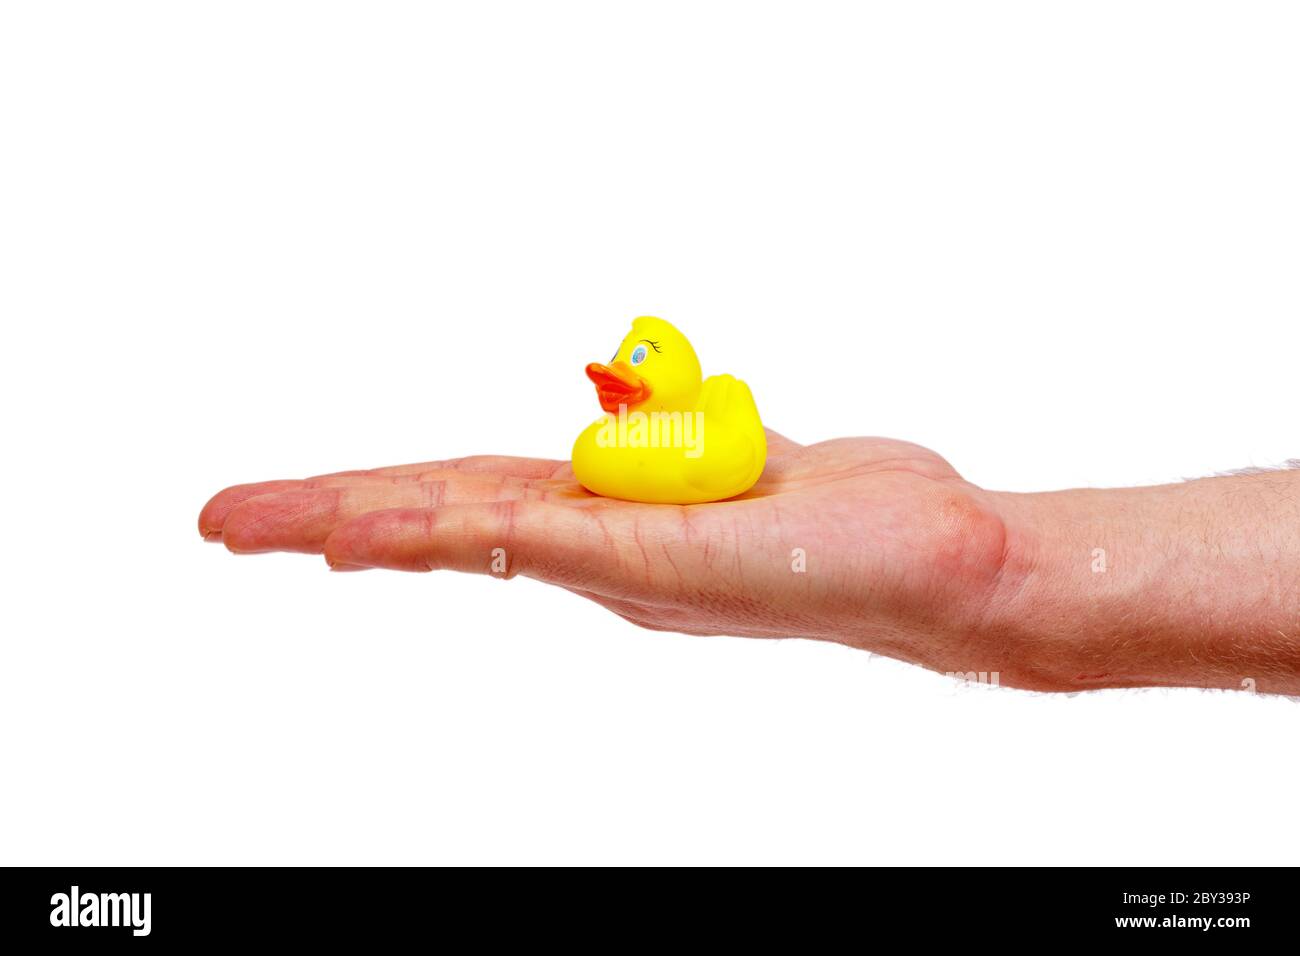 Male hand holding a rubber duck isolated on white background. Minimalistic concept. Stock Photo